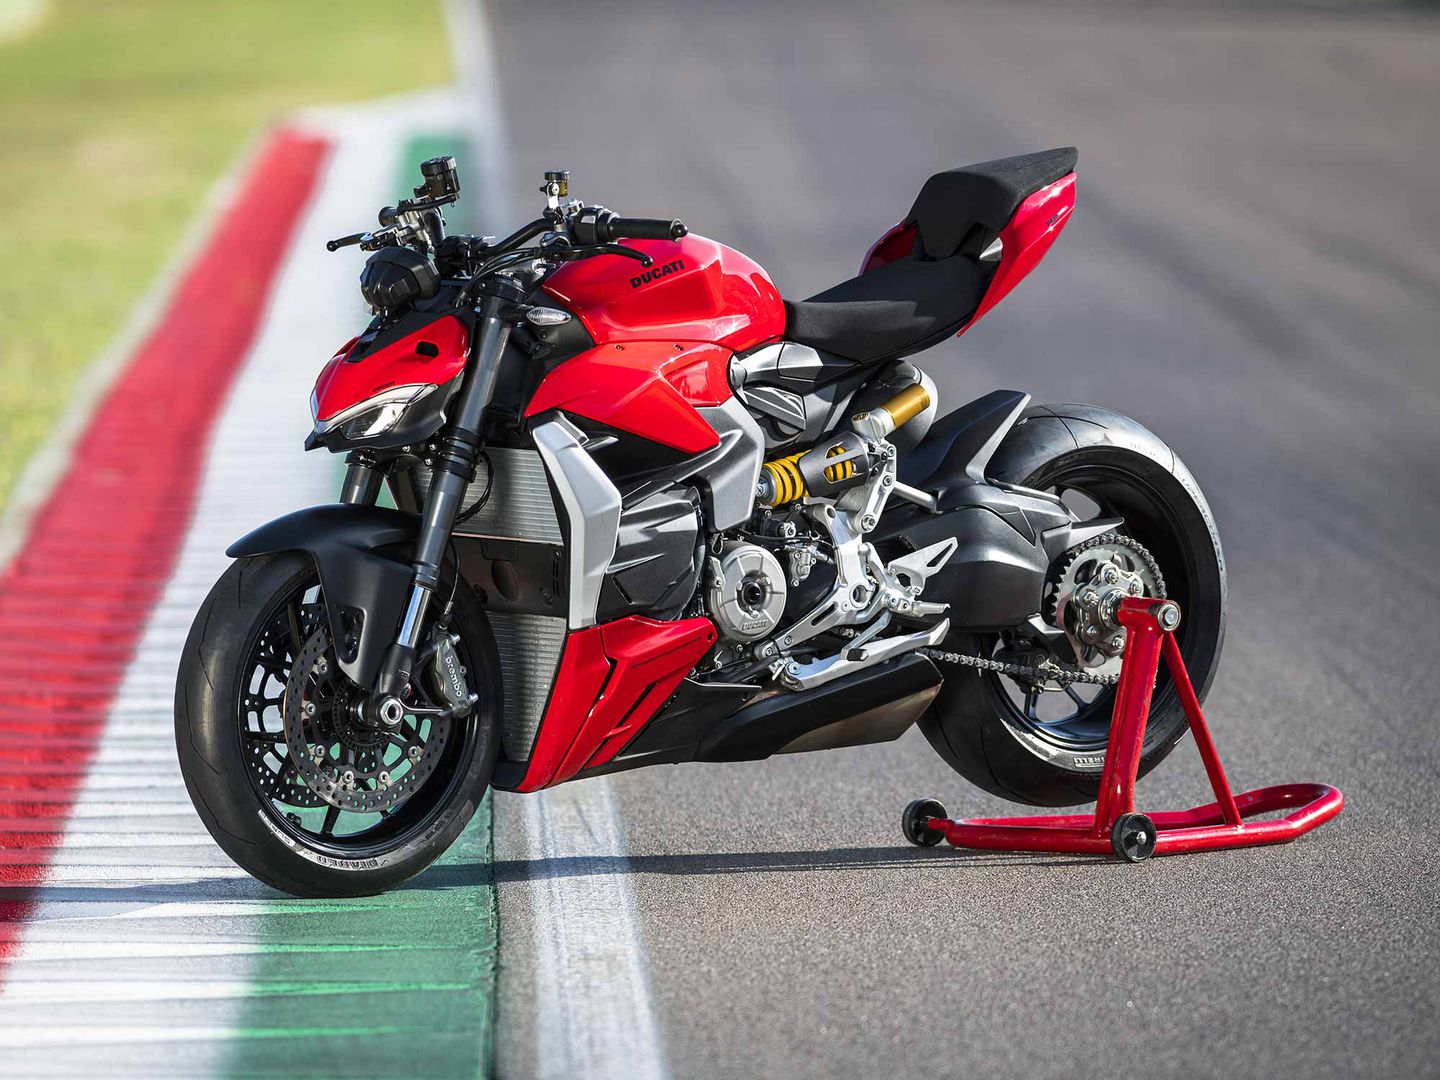 Ducati Performance Line: Accessories for the Streetfighter V2 - webBikeWorld